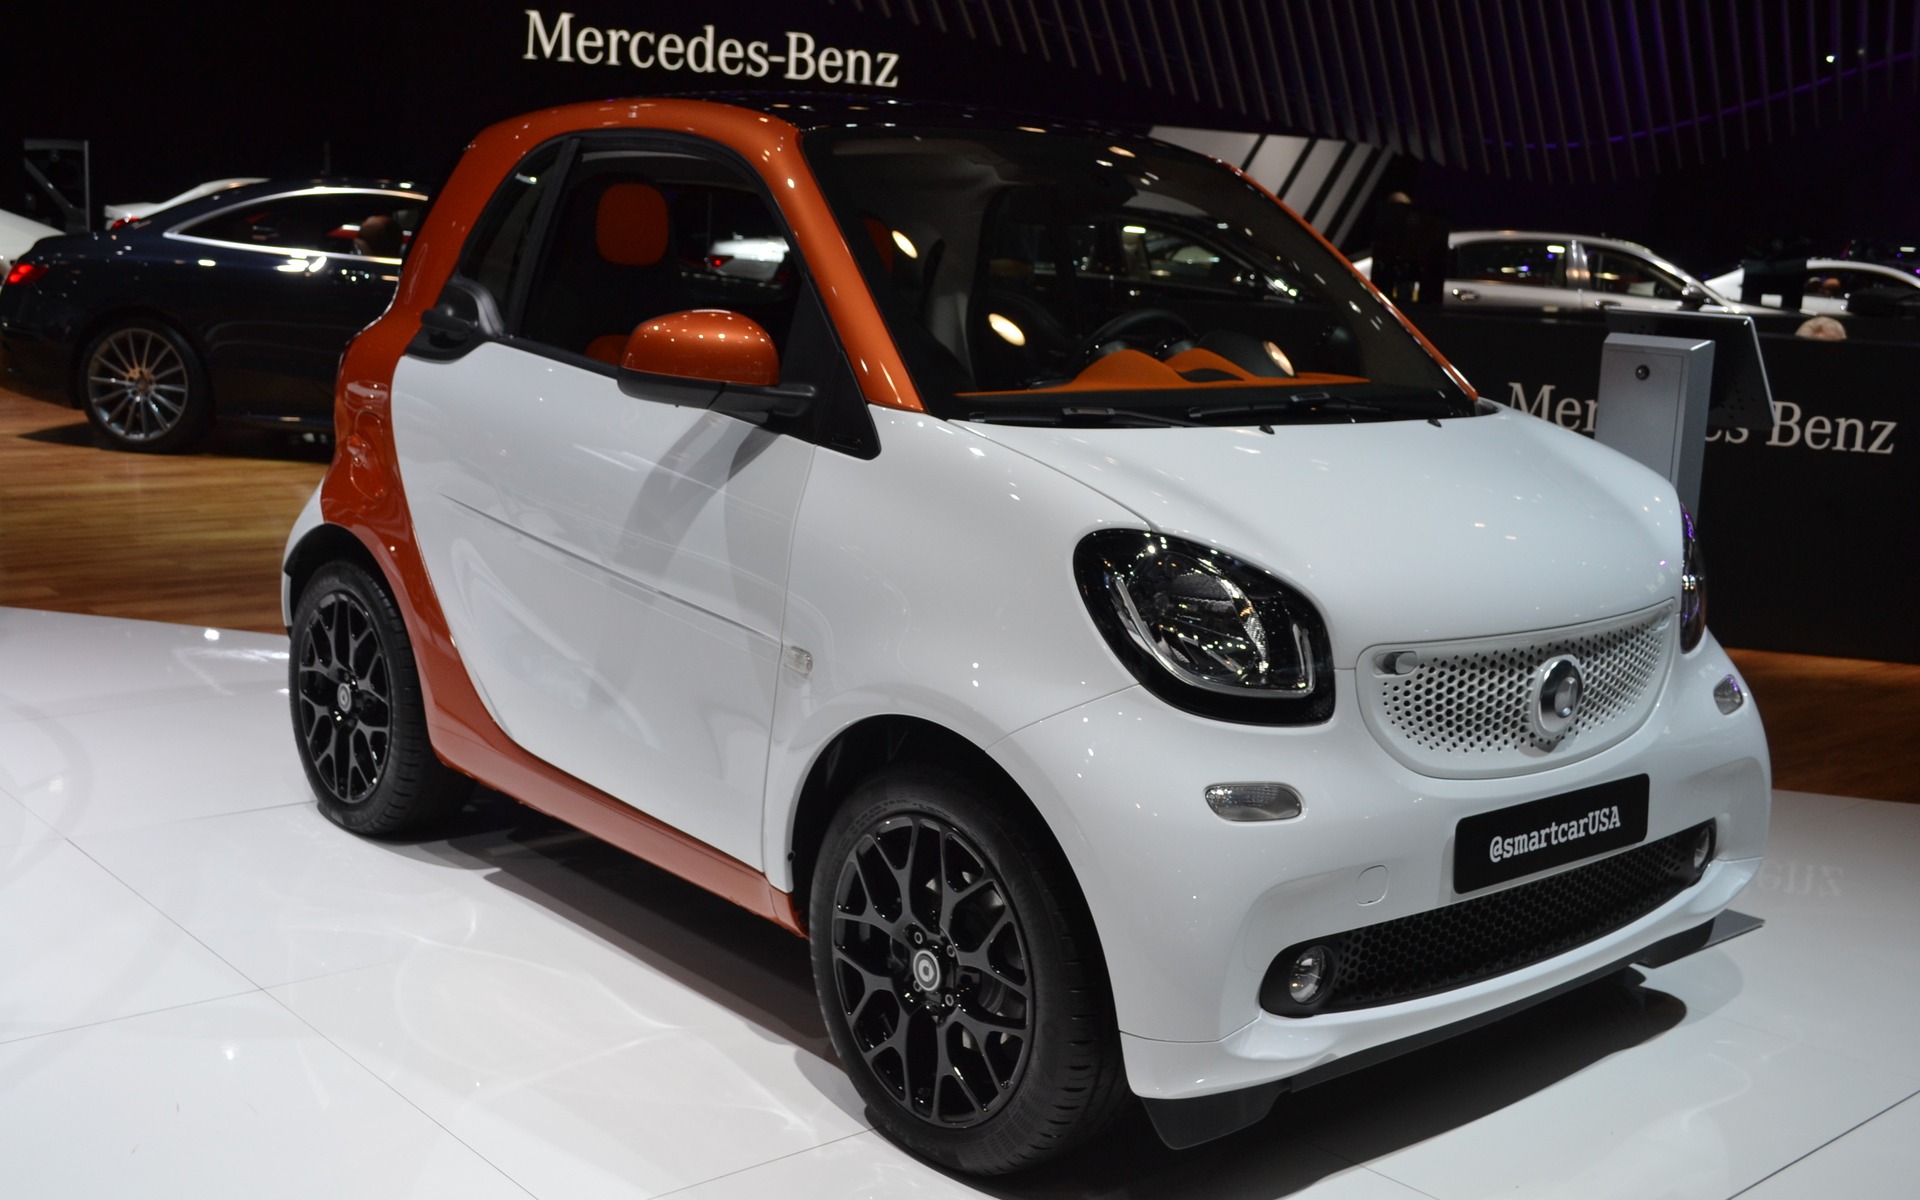 The Smart fortwo: Why Mercedes' Smallest Car was its Biggest